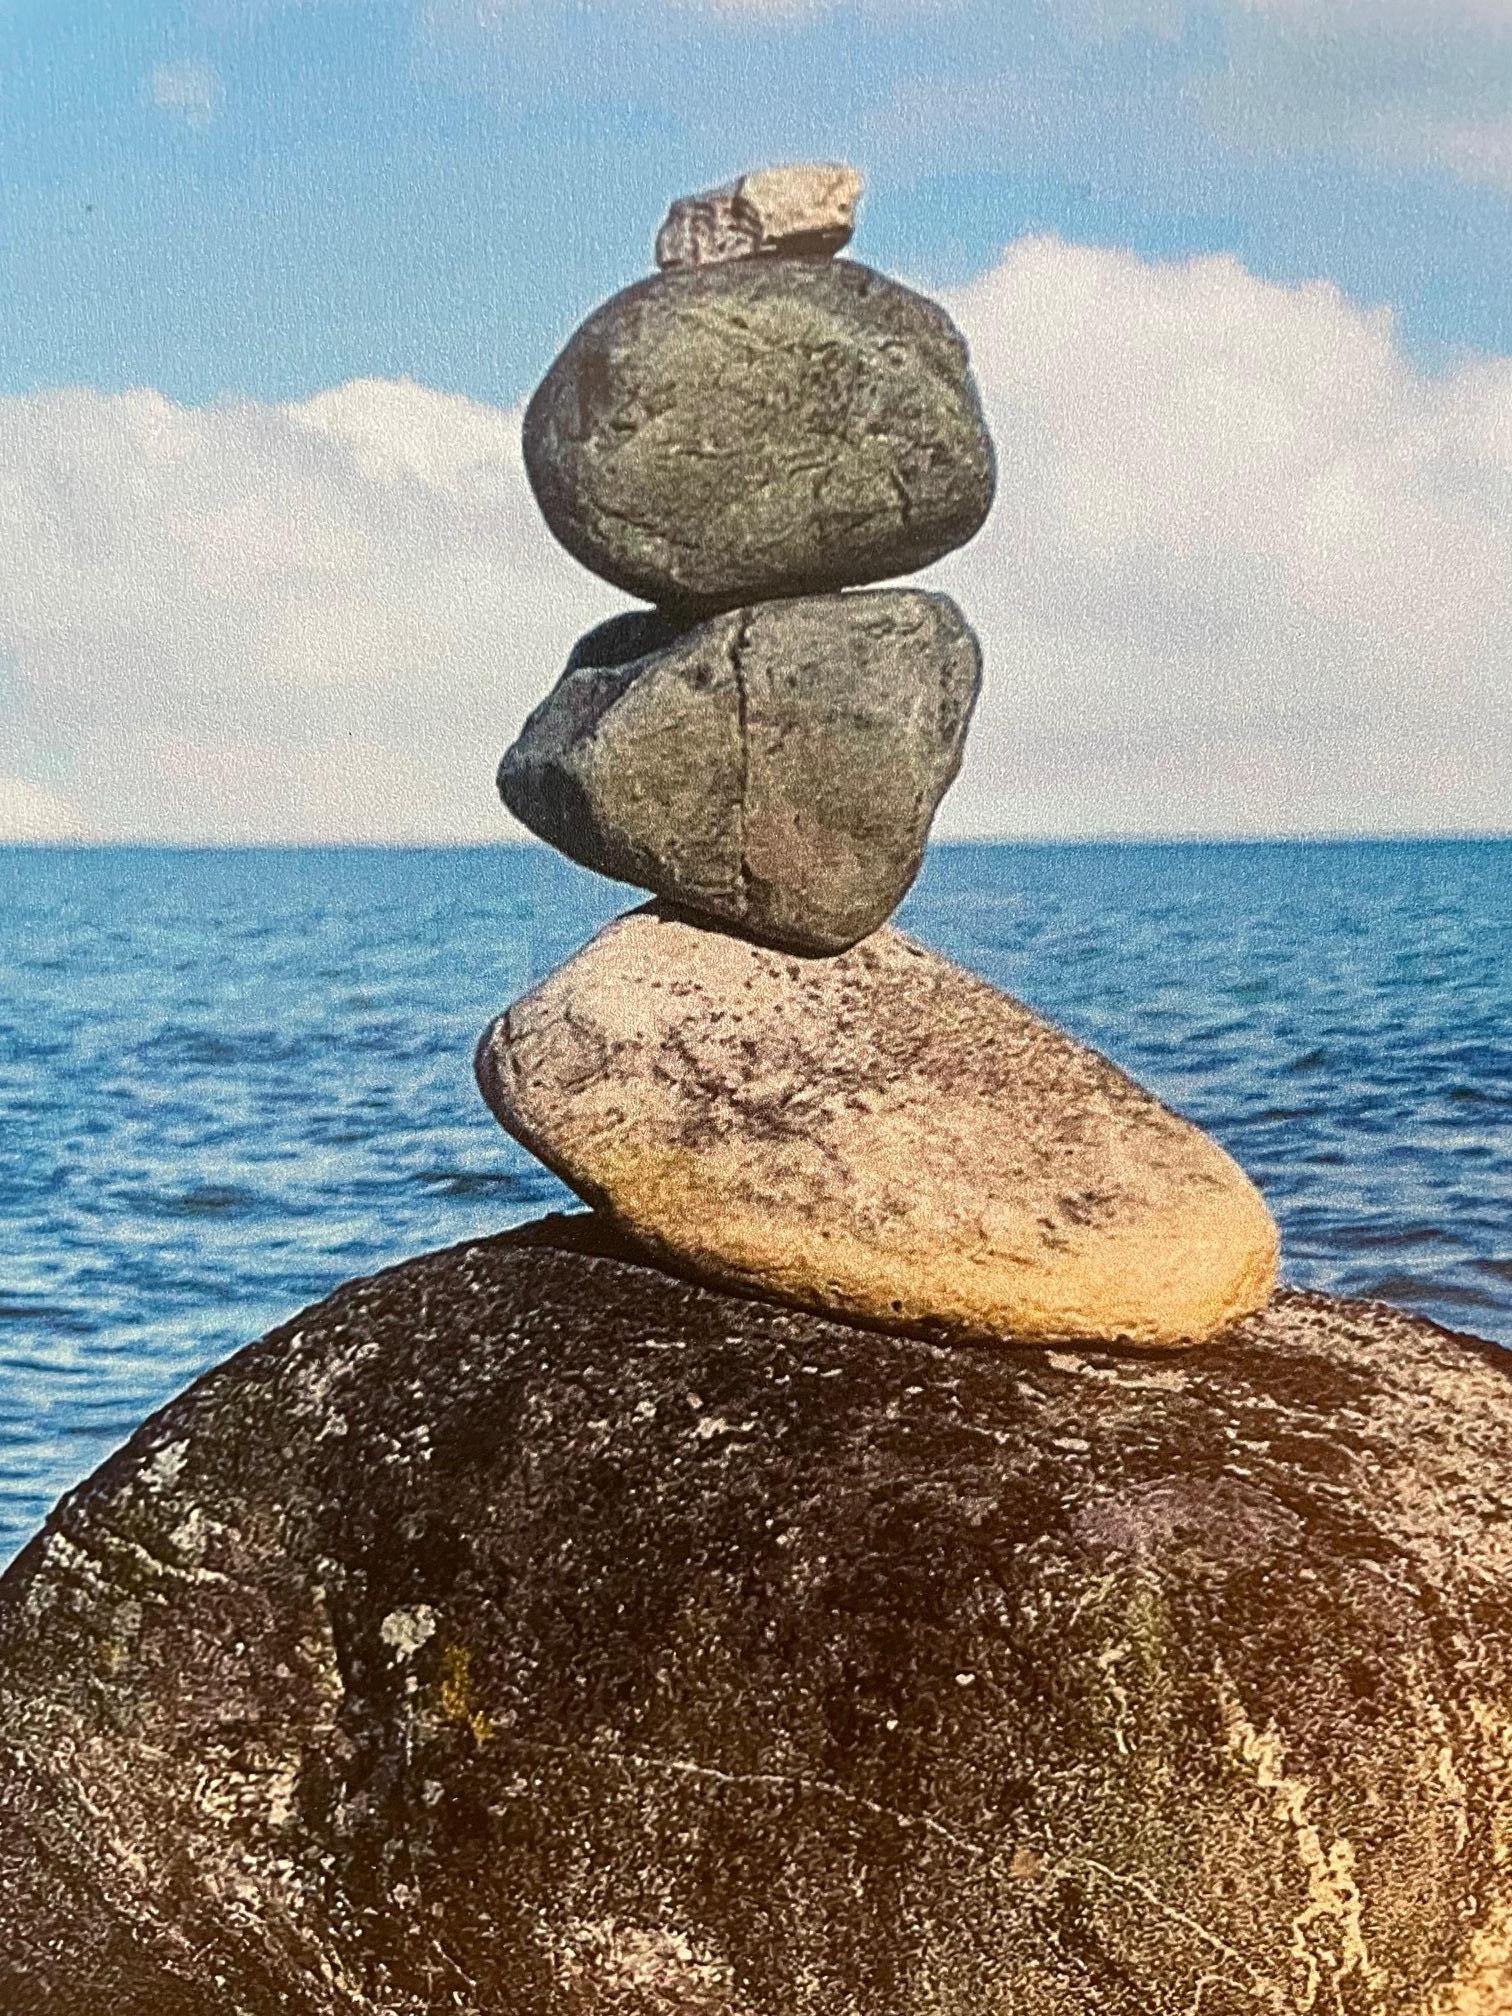 Anchor Bay in Chesterfield, Michigan is the location for this metallic print of a photographic image by Deborah Benedic.
Deborah created these stone inuksuks one afternoon on her neighborhood walk to mark her favorite view of the bay.
This large